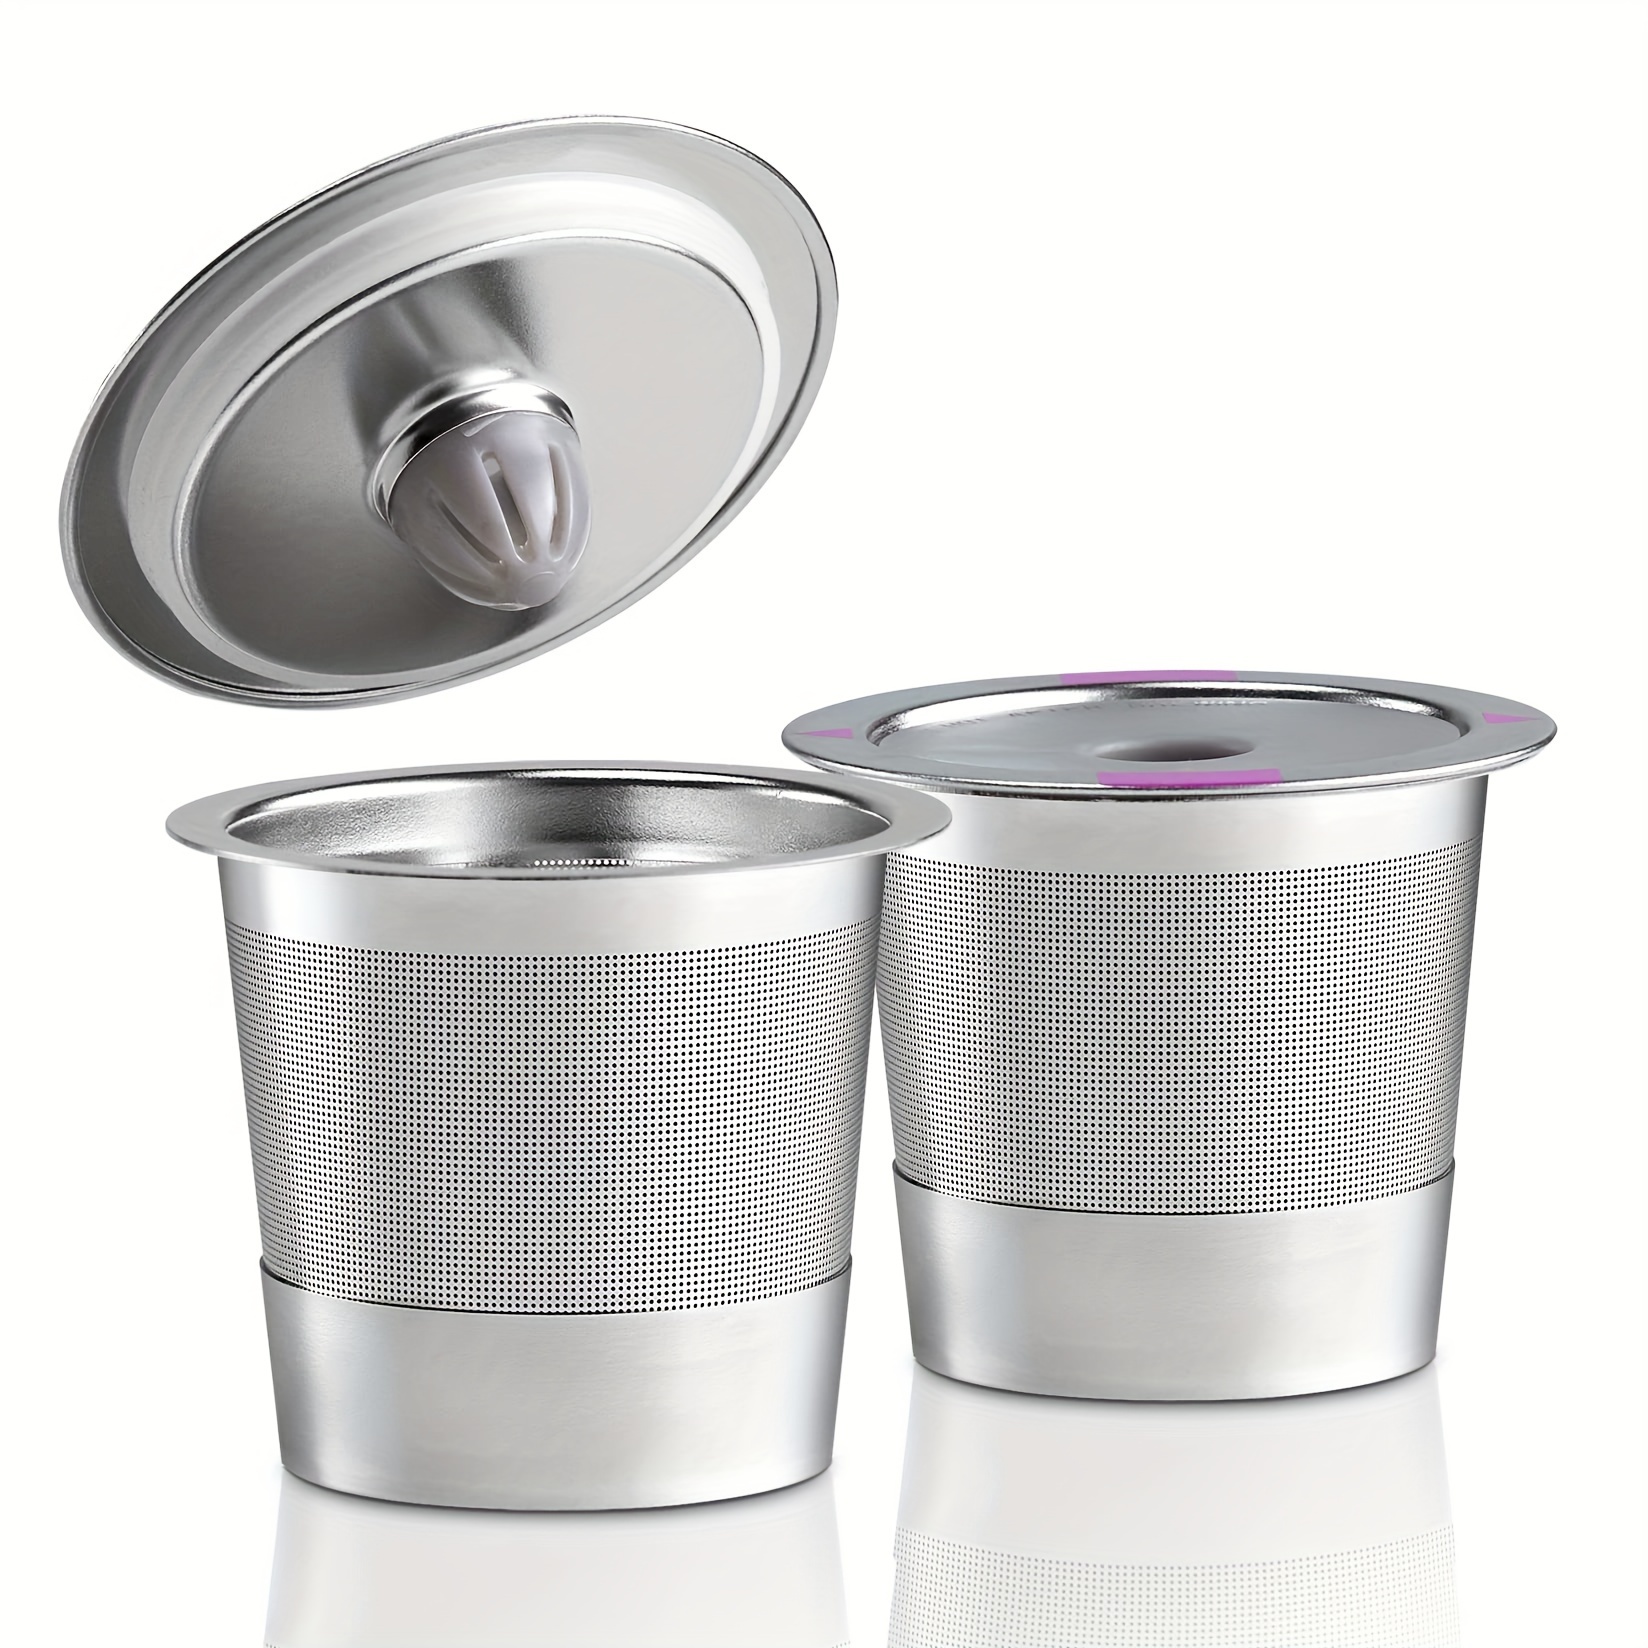 Aluminum Snus cans Snuffbox with lid silver color 3 Layers Christmas Gifts  snus can (Silver)